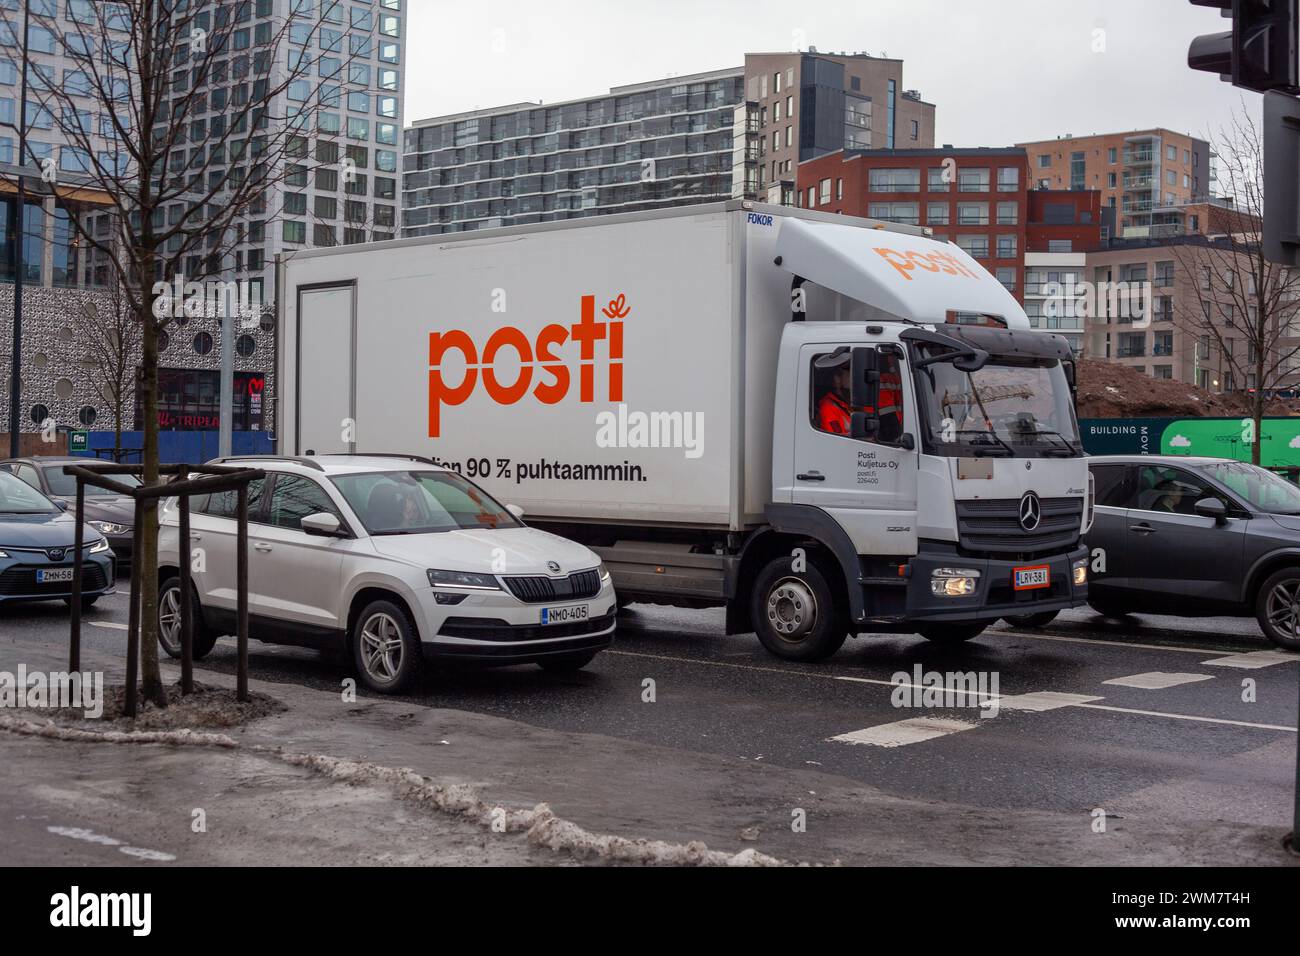 A Posti delivery truck is parked on a city street, with cars and urban buildings in the background; the image captures everyday urban life. Stock Photo